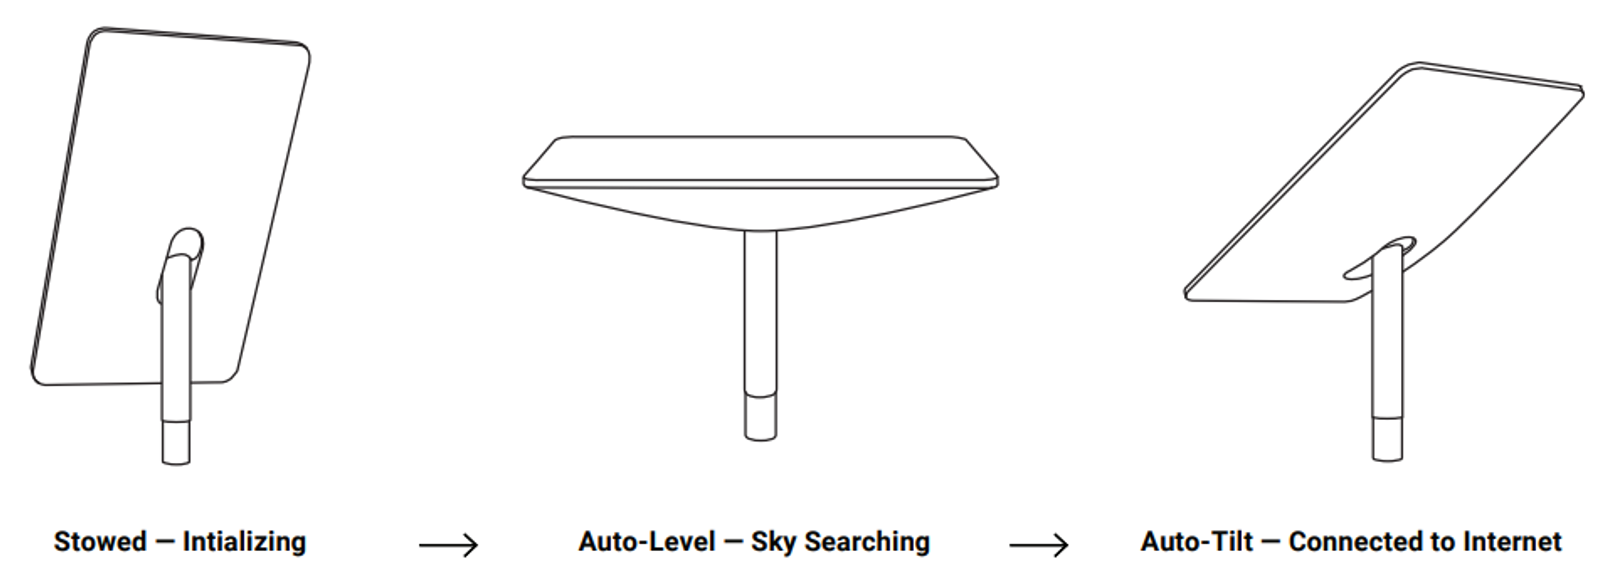 A drawing of an auto-level sky searching device.